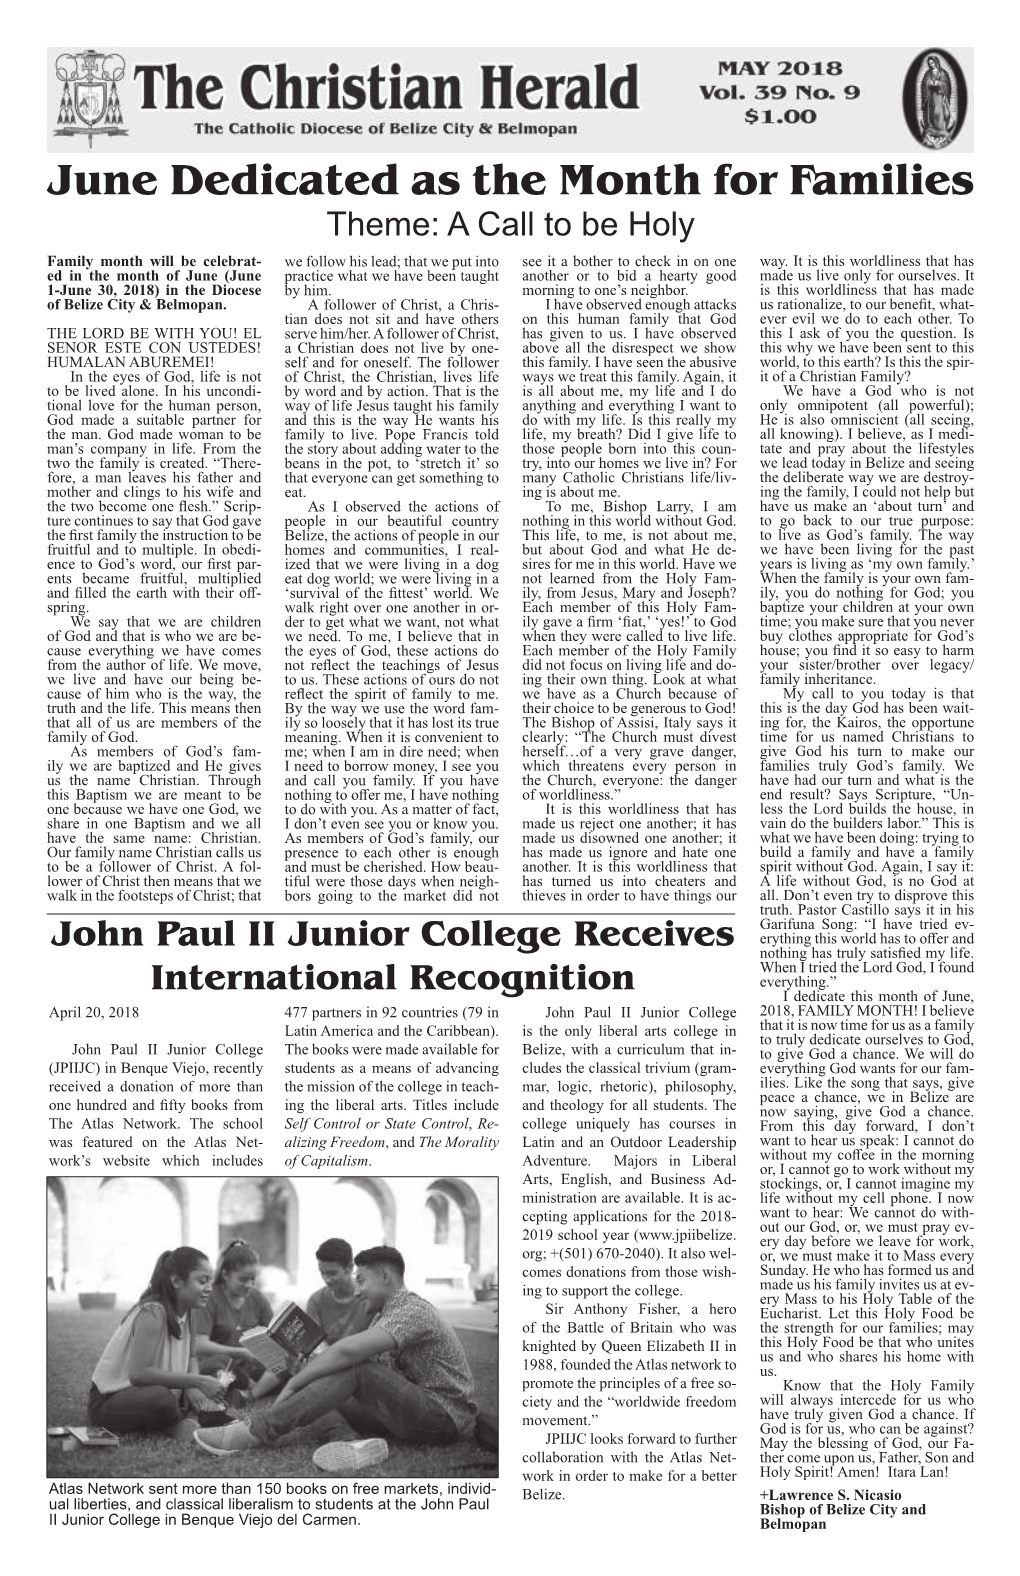 THE CHRISTIAN HERALD May 2018 Page 2 Ad Limina Visit to Rome April 16, 2018